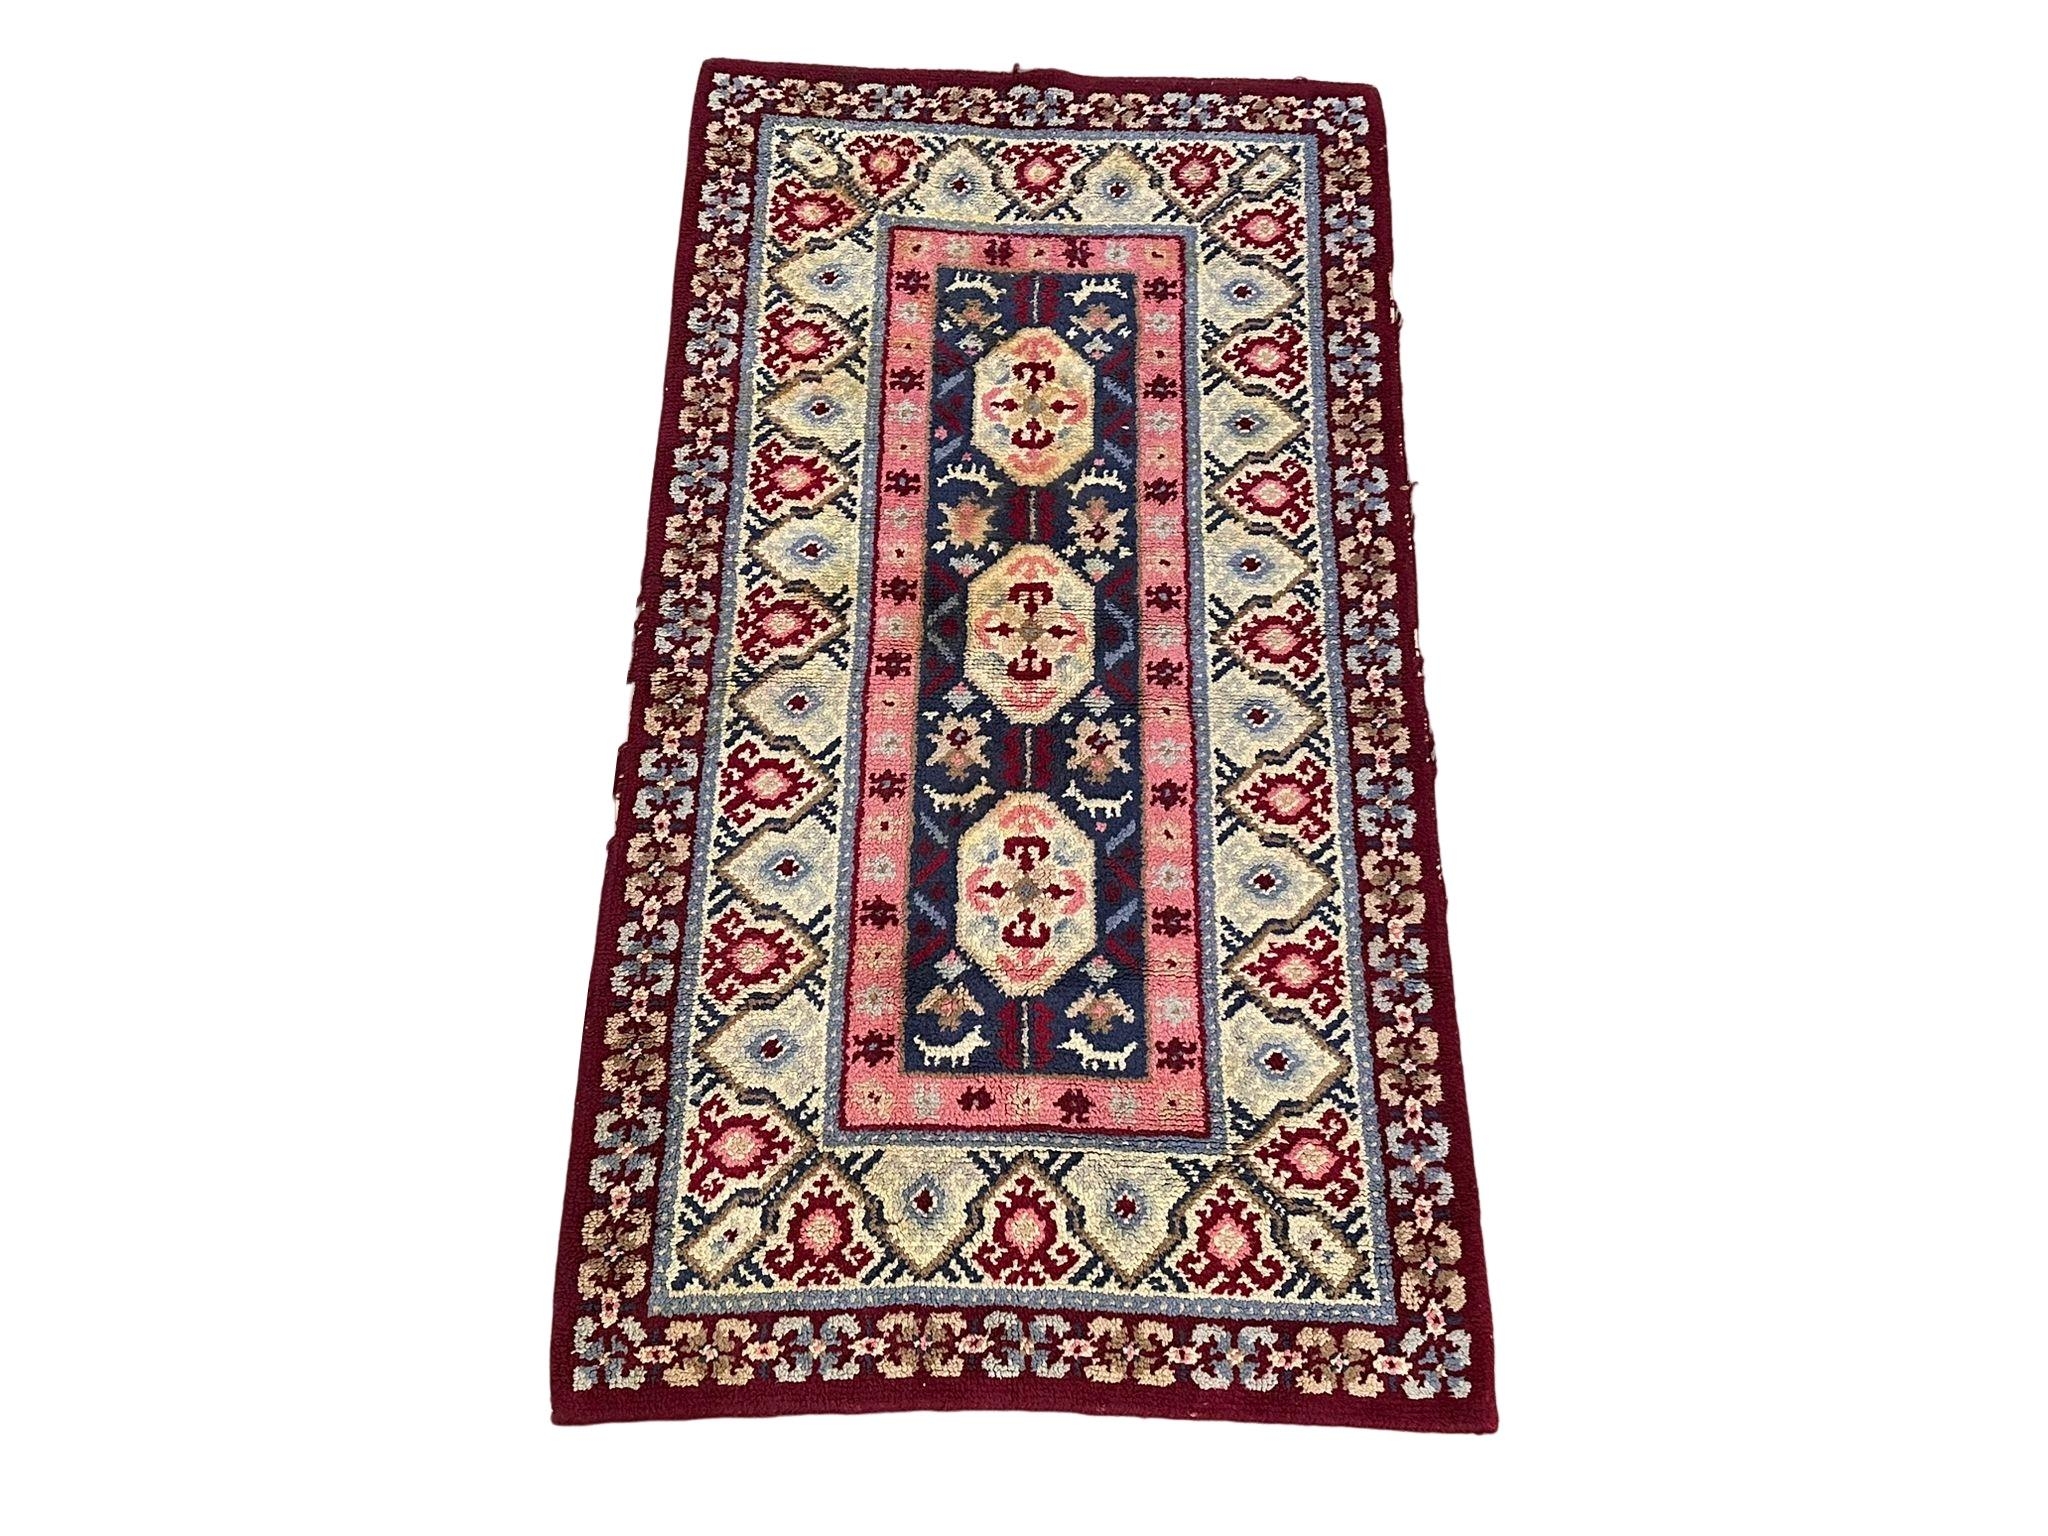 A large vintage Middle Eastern style wool rug. 229x123cm